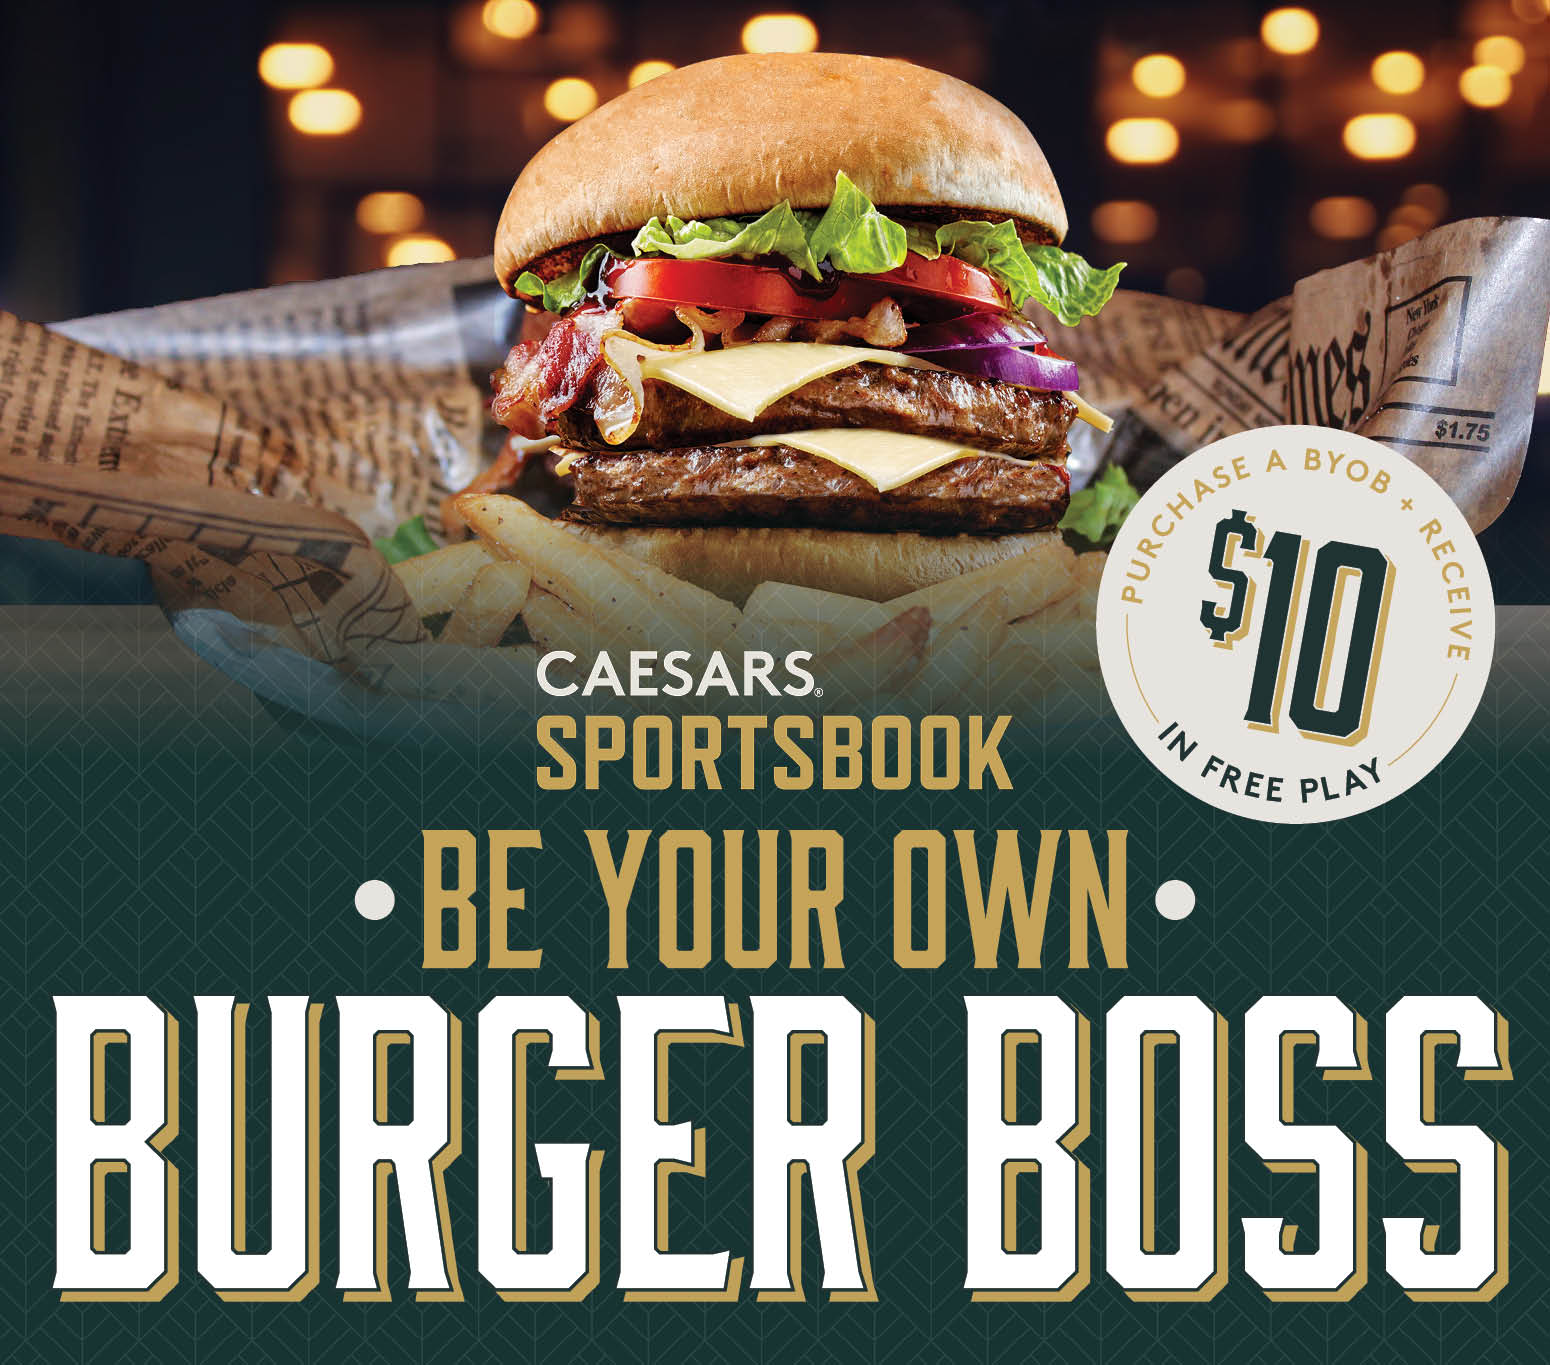 BE YOUR OWN BURGER BOSS